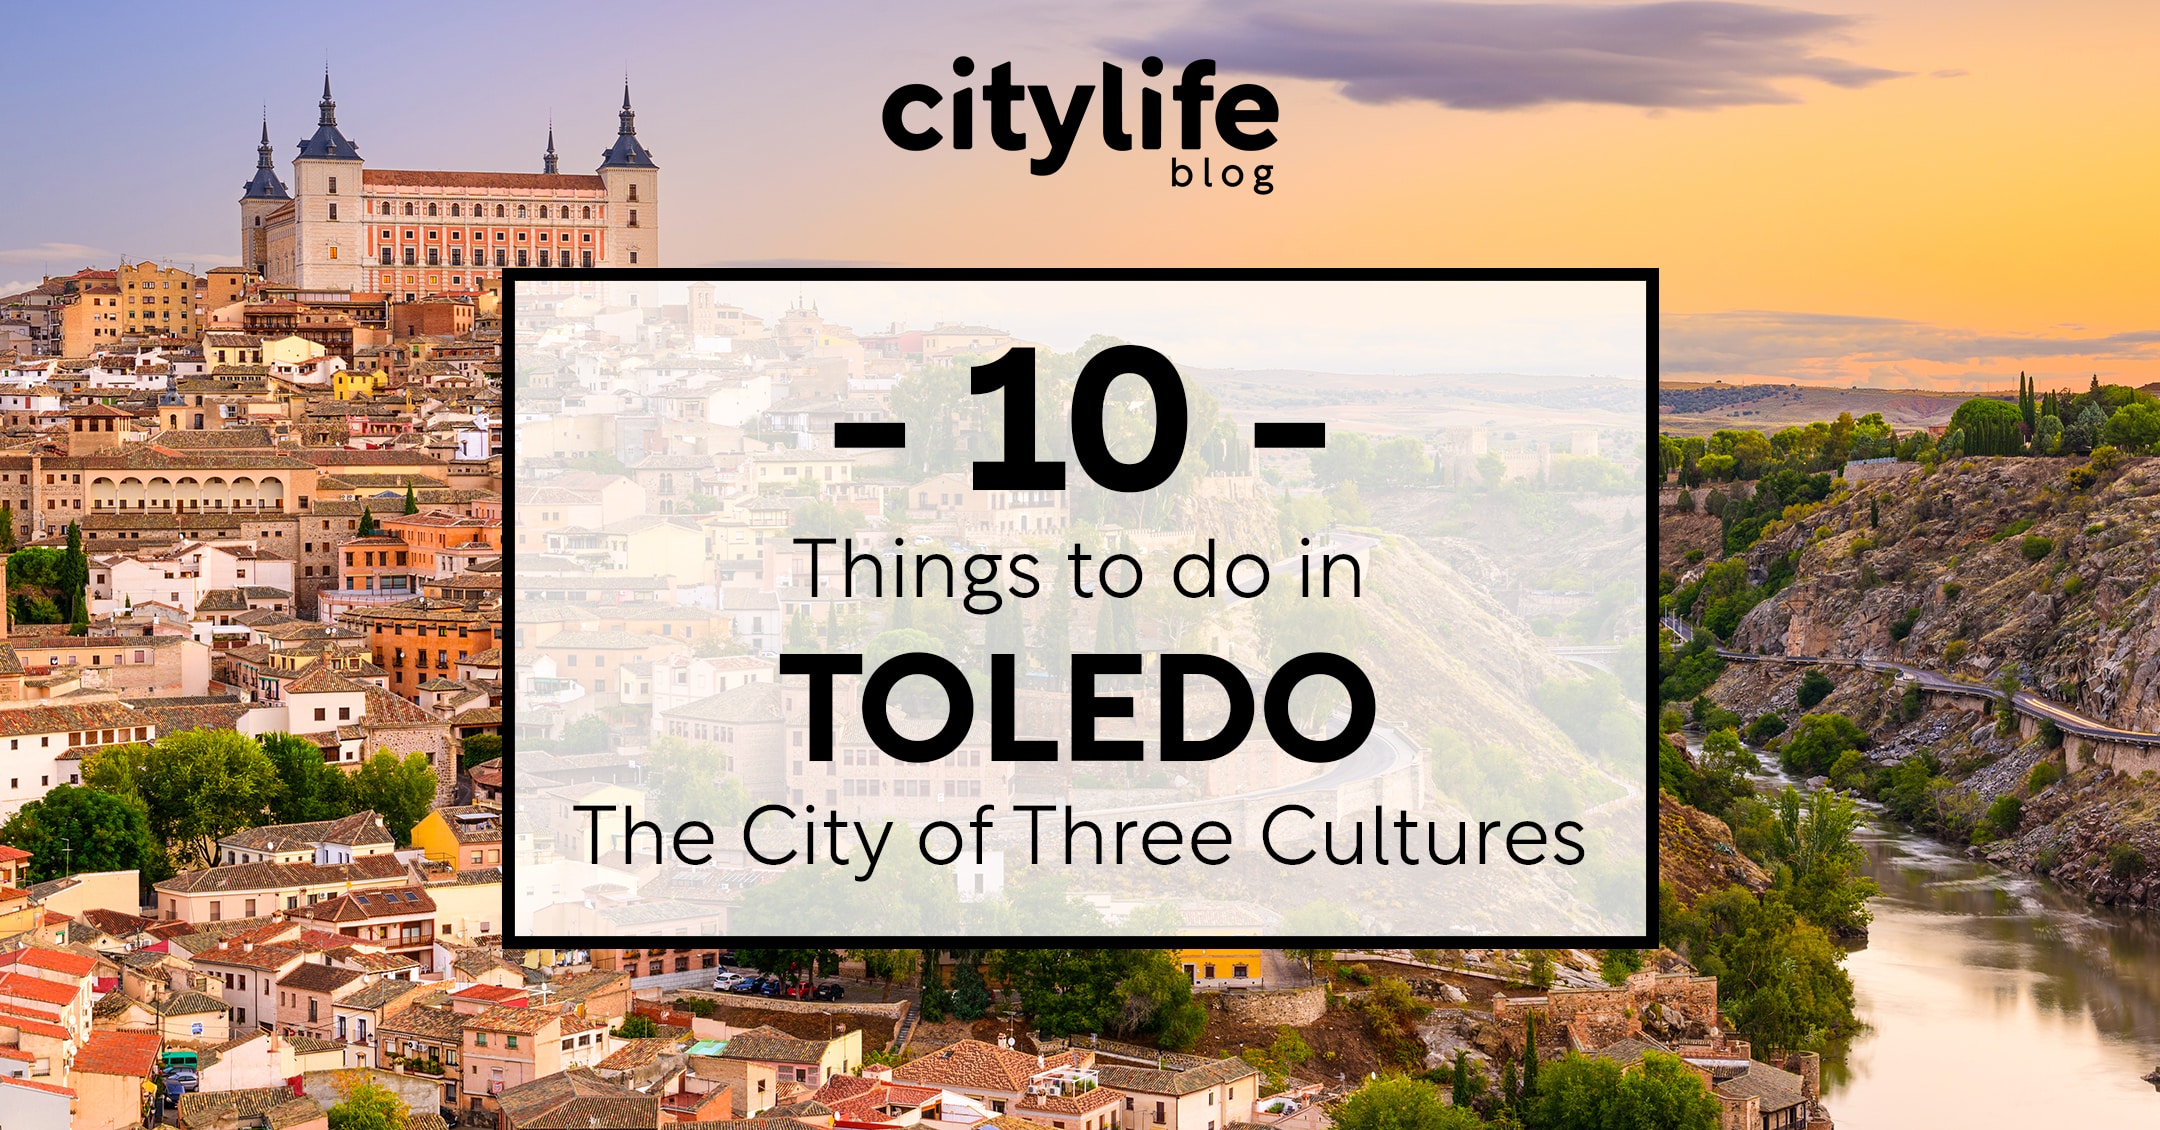 featured-image-10-things-to-do-toledo-citylife-madrid